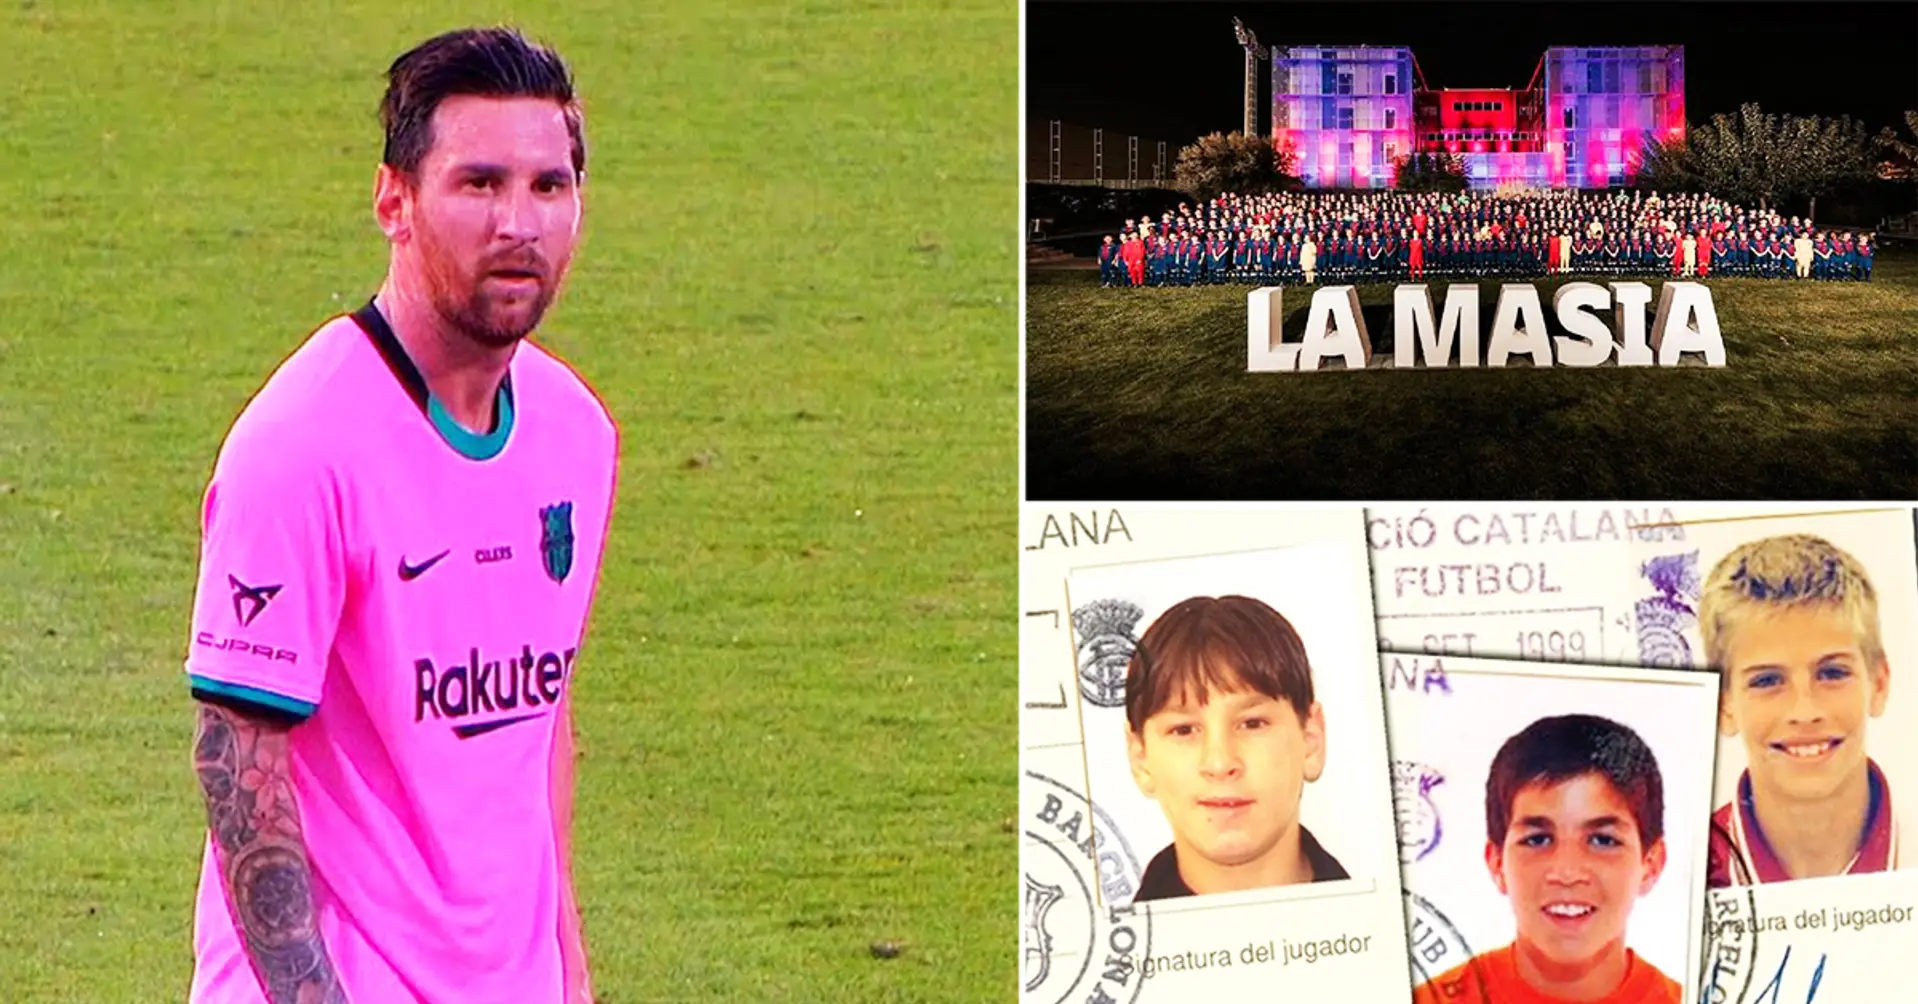 Revealed: Barcelona intoduce ‘new rules’ for players at famous La Masia academy